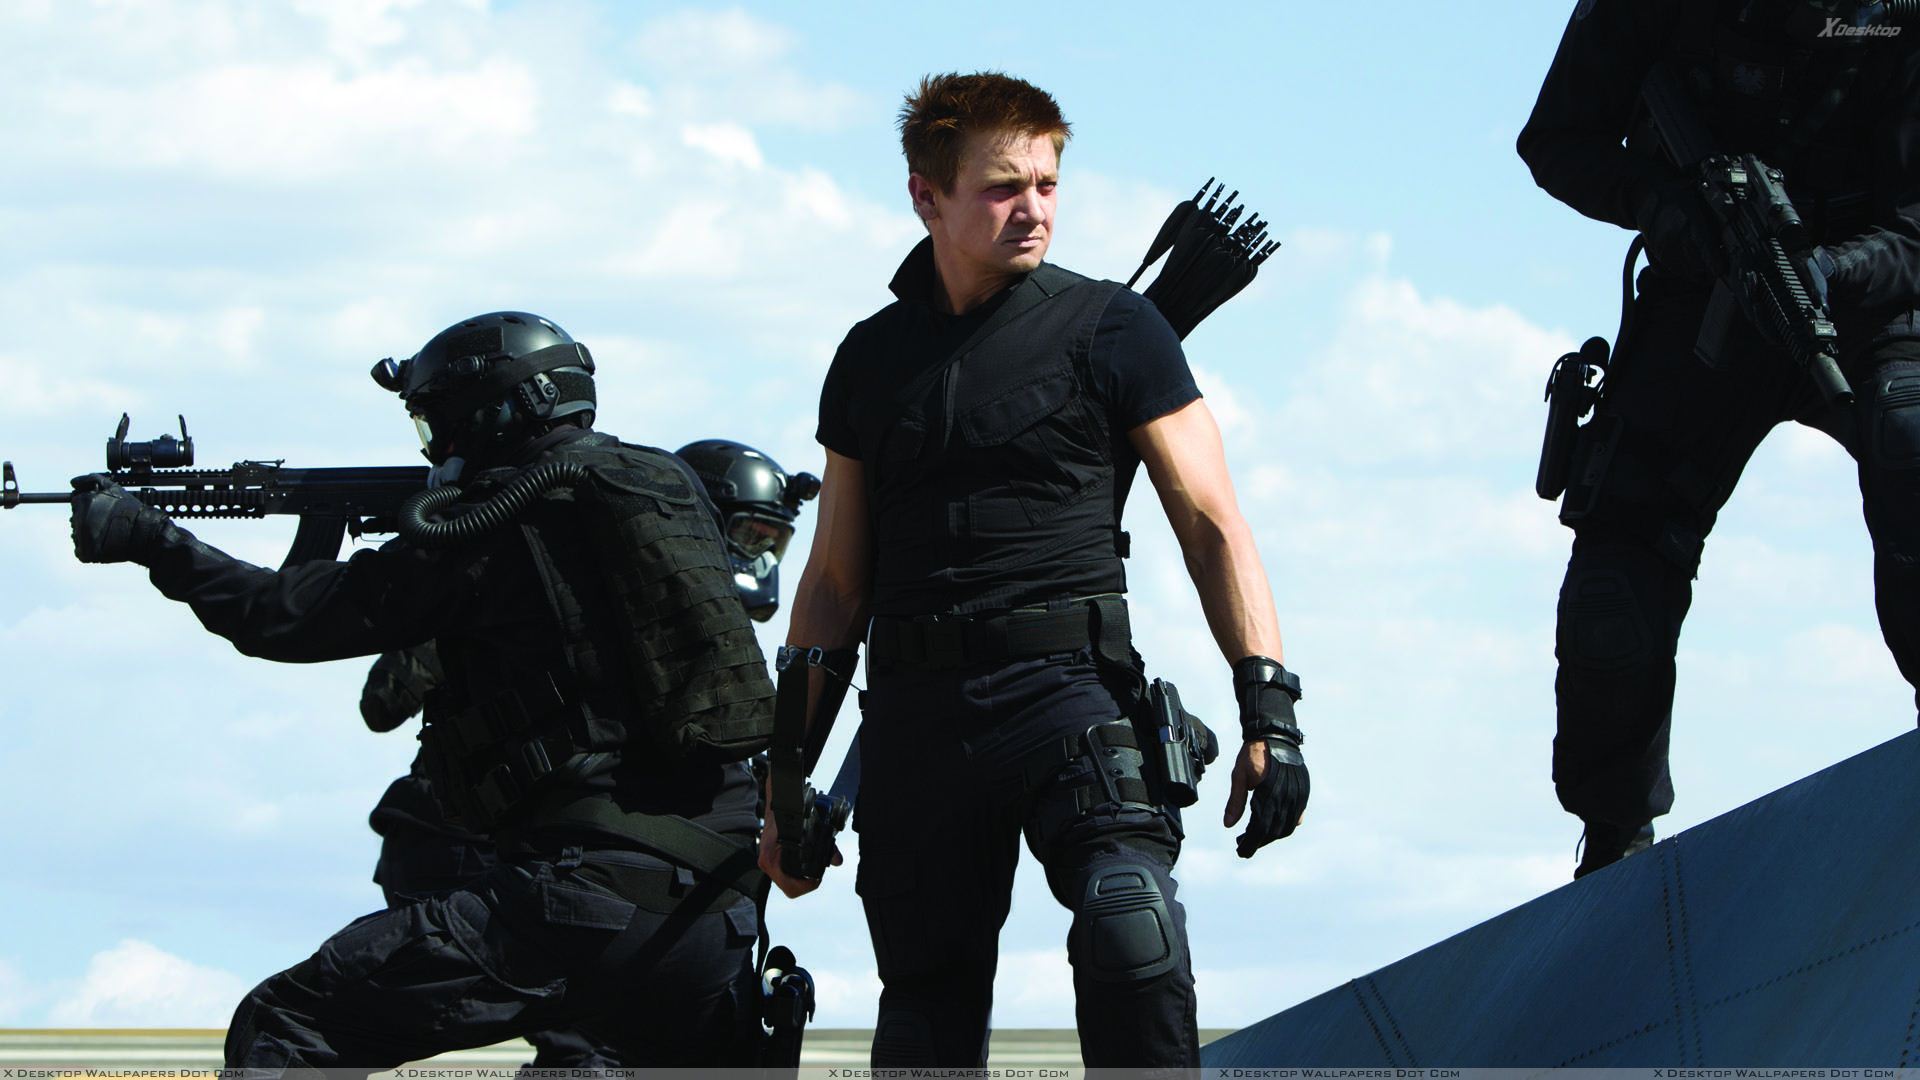 The Avengers Jeremy Renner In Black Dress Looking Something